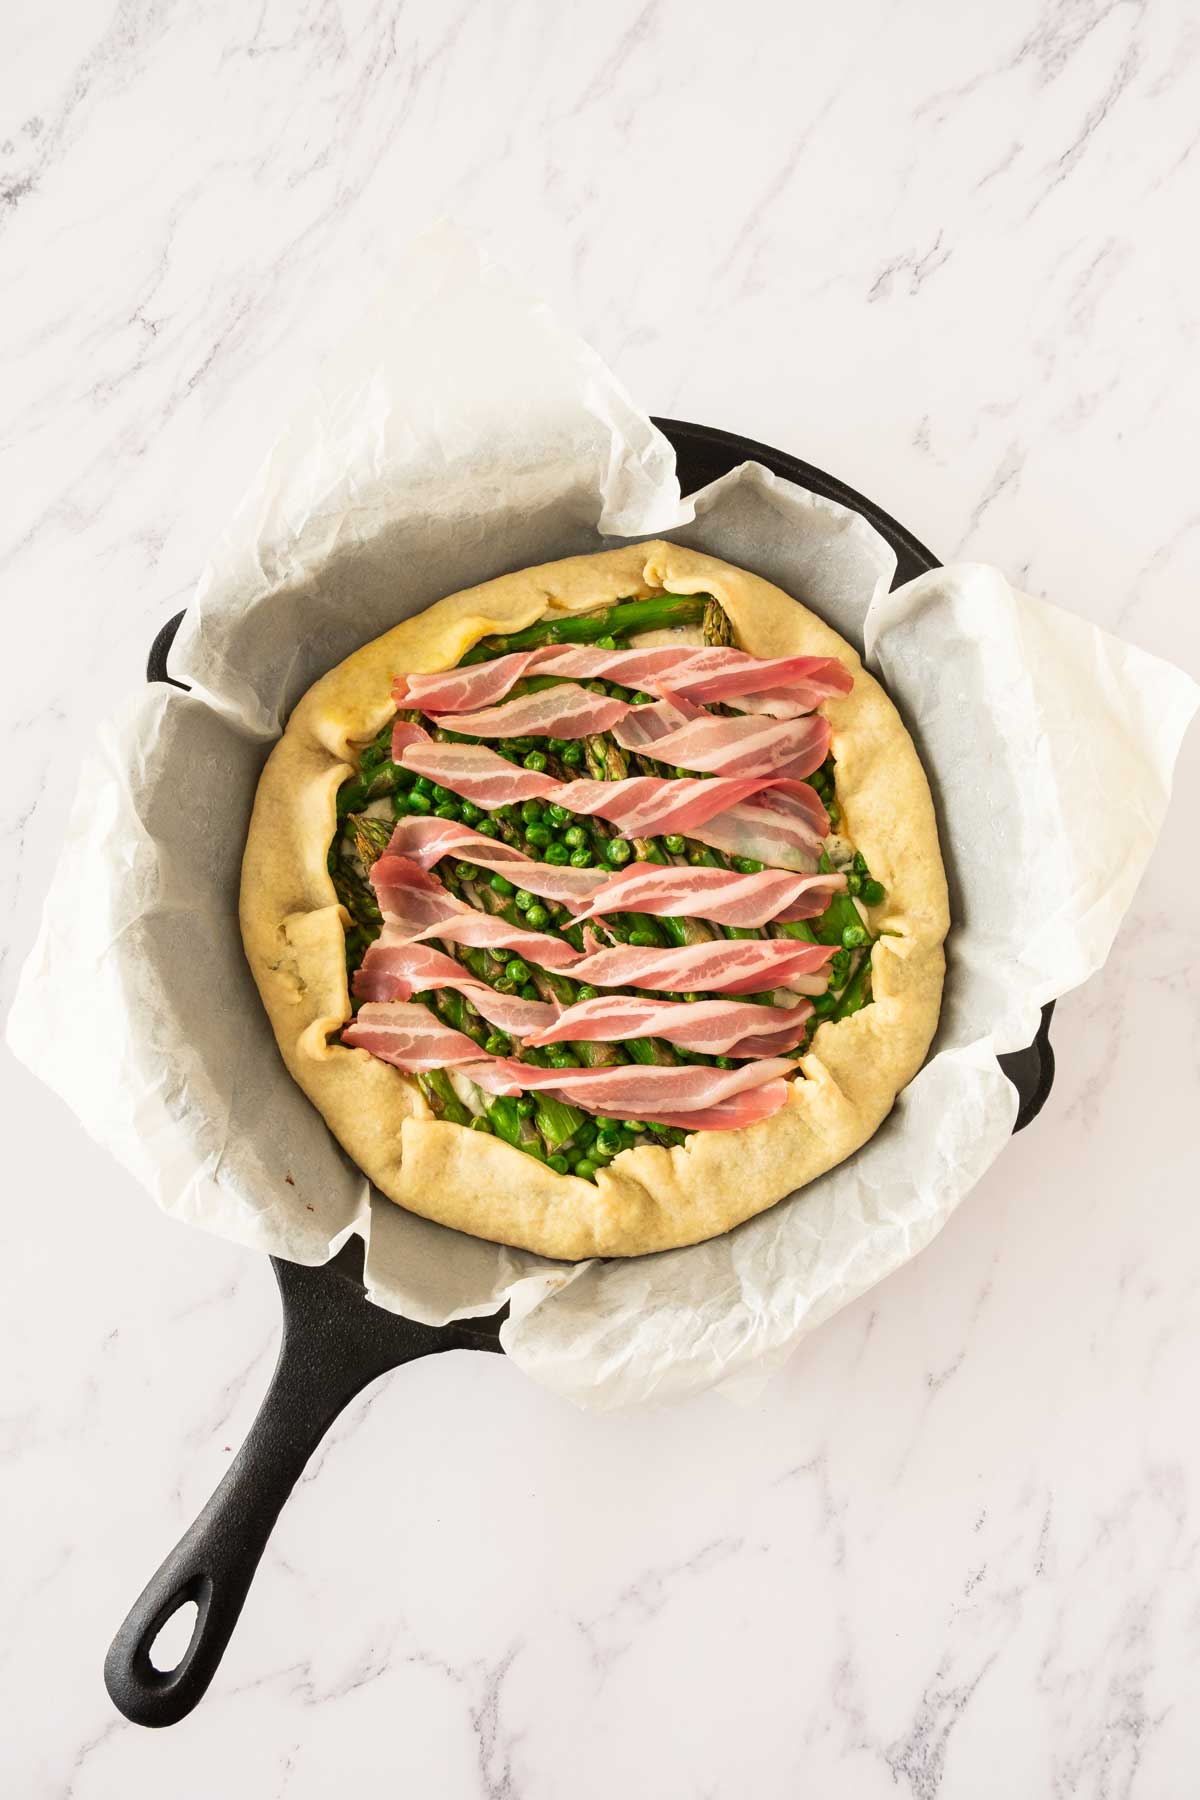 An asparagus galette in a cast iron pan with peas topped with bacon strips during the cooking process.